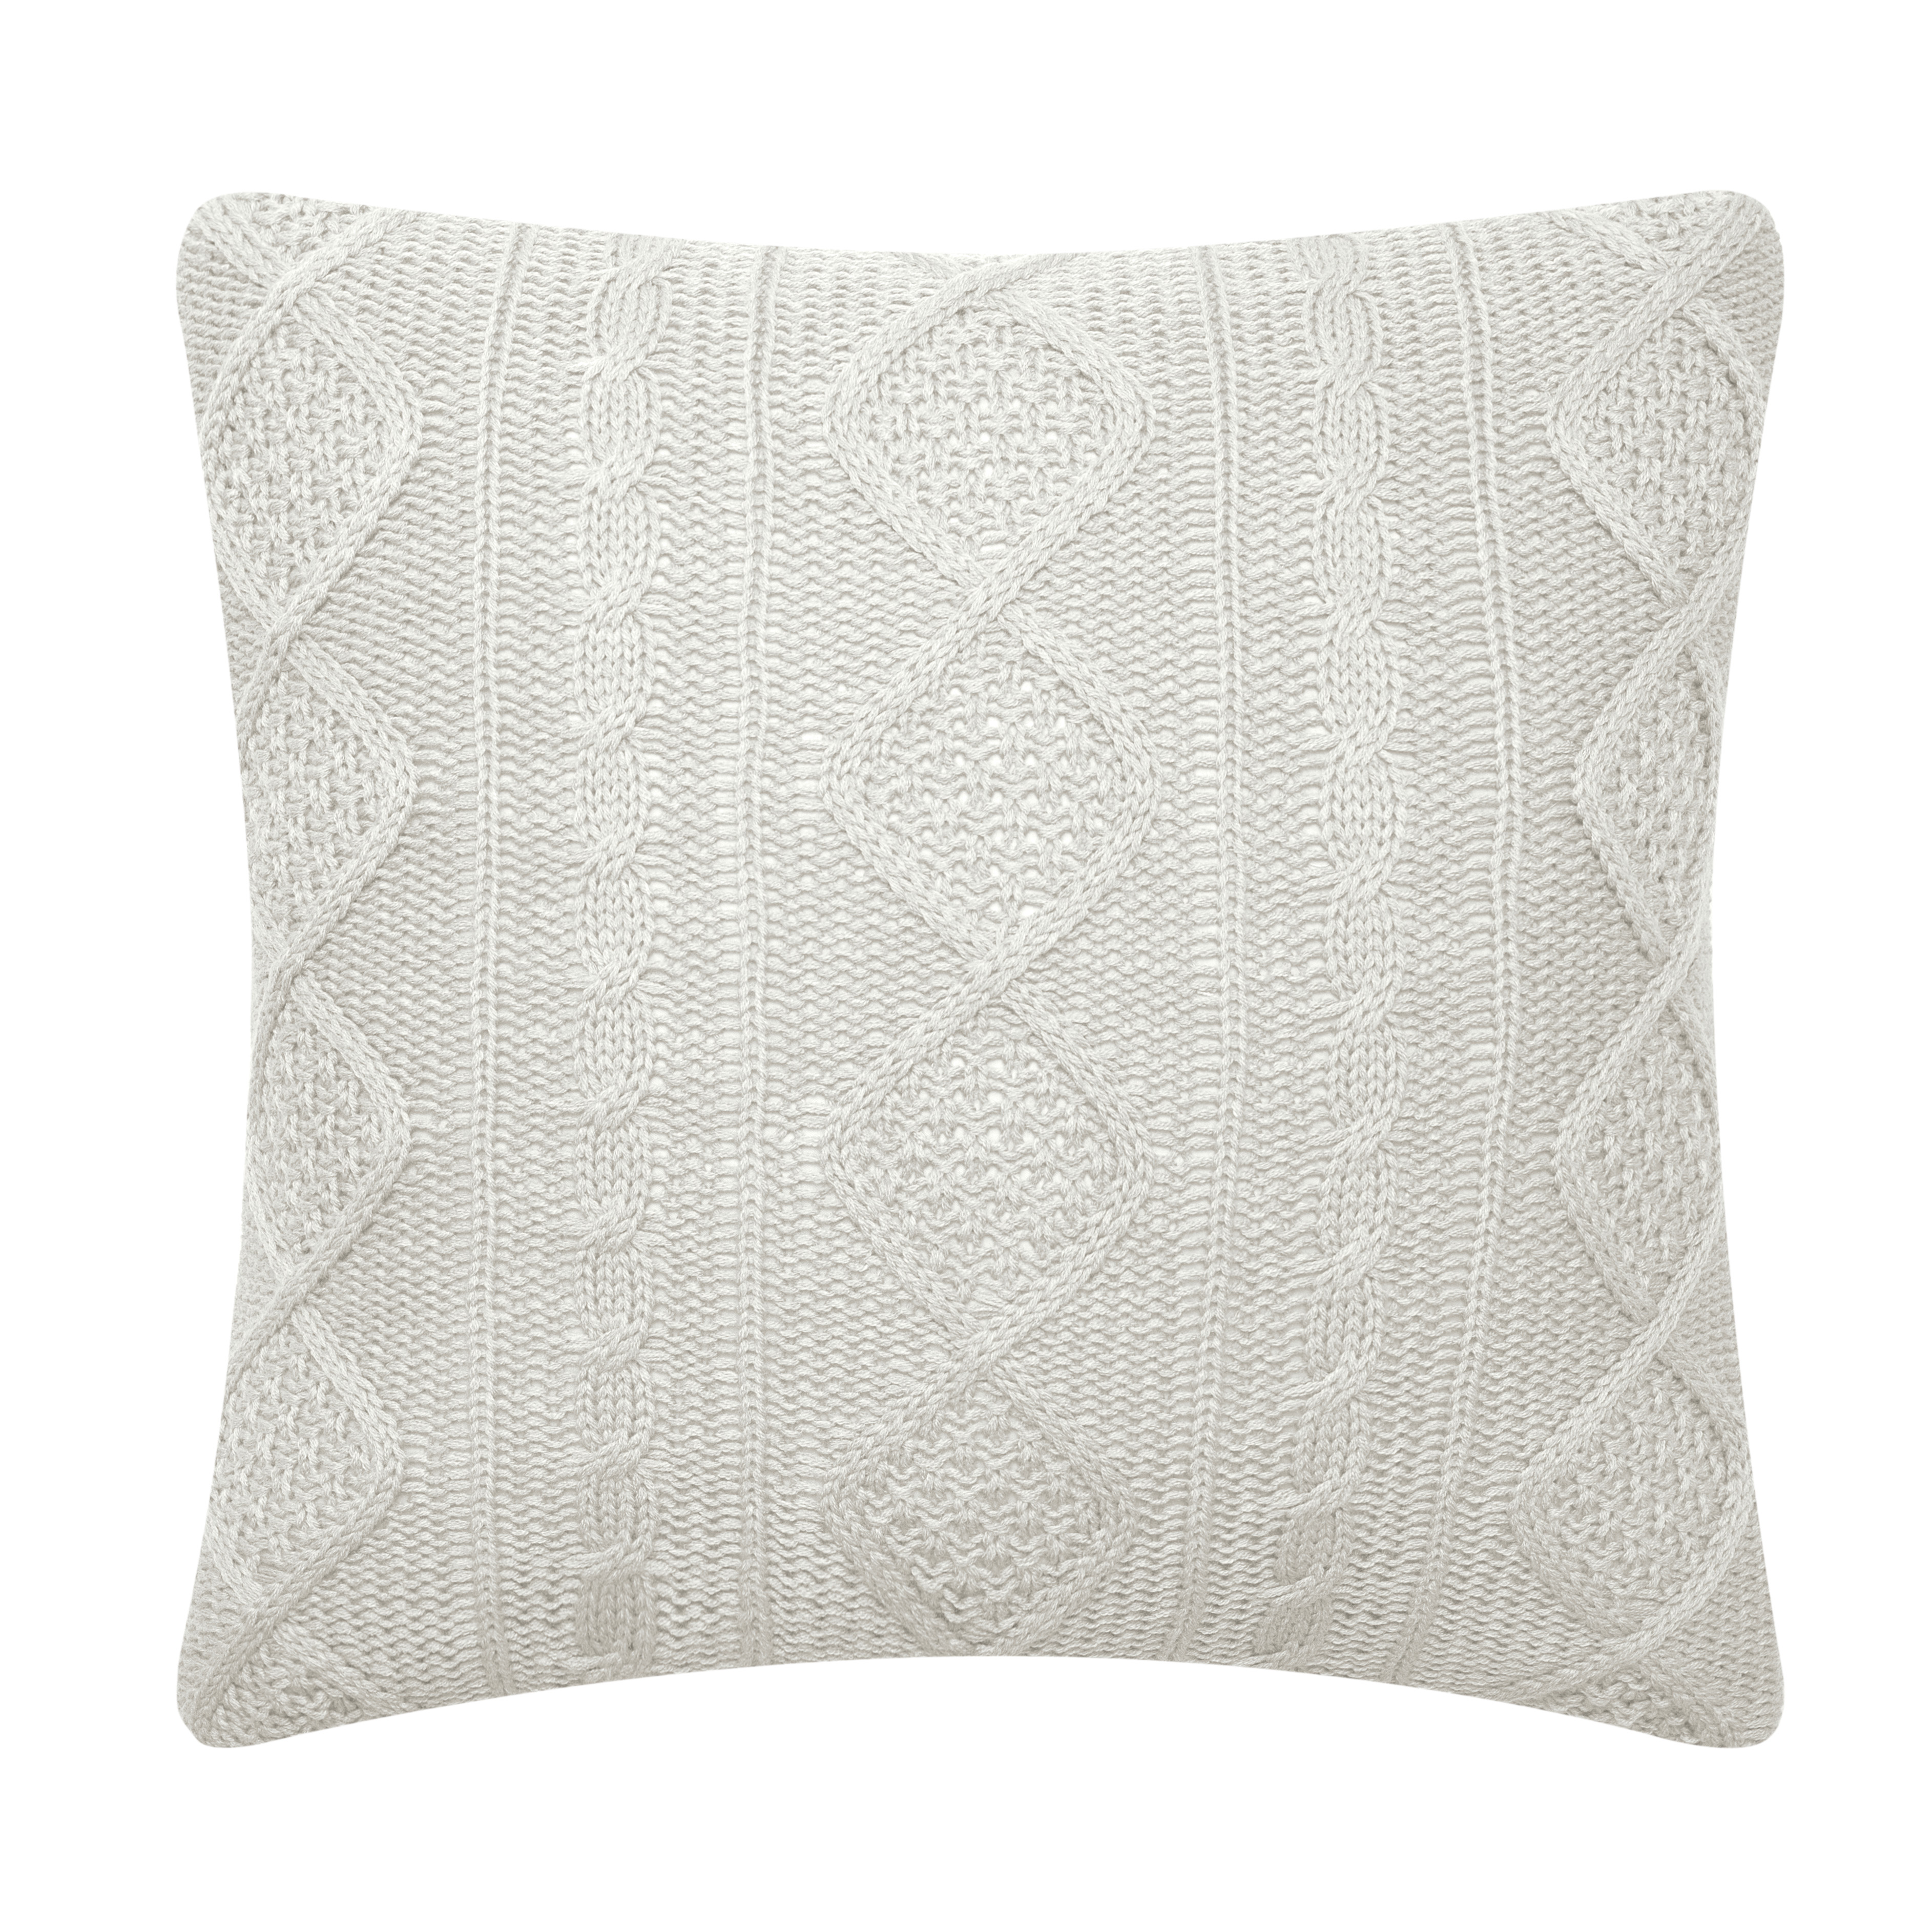 Better Homes & Gardens Feather Filled Wide Cable Knit Sweater Decorative Throw Pillow, 20" x 20" - image 1 of 4